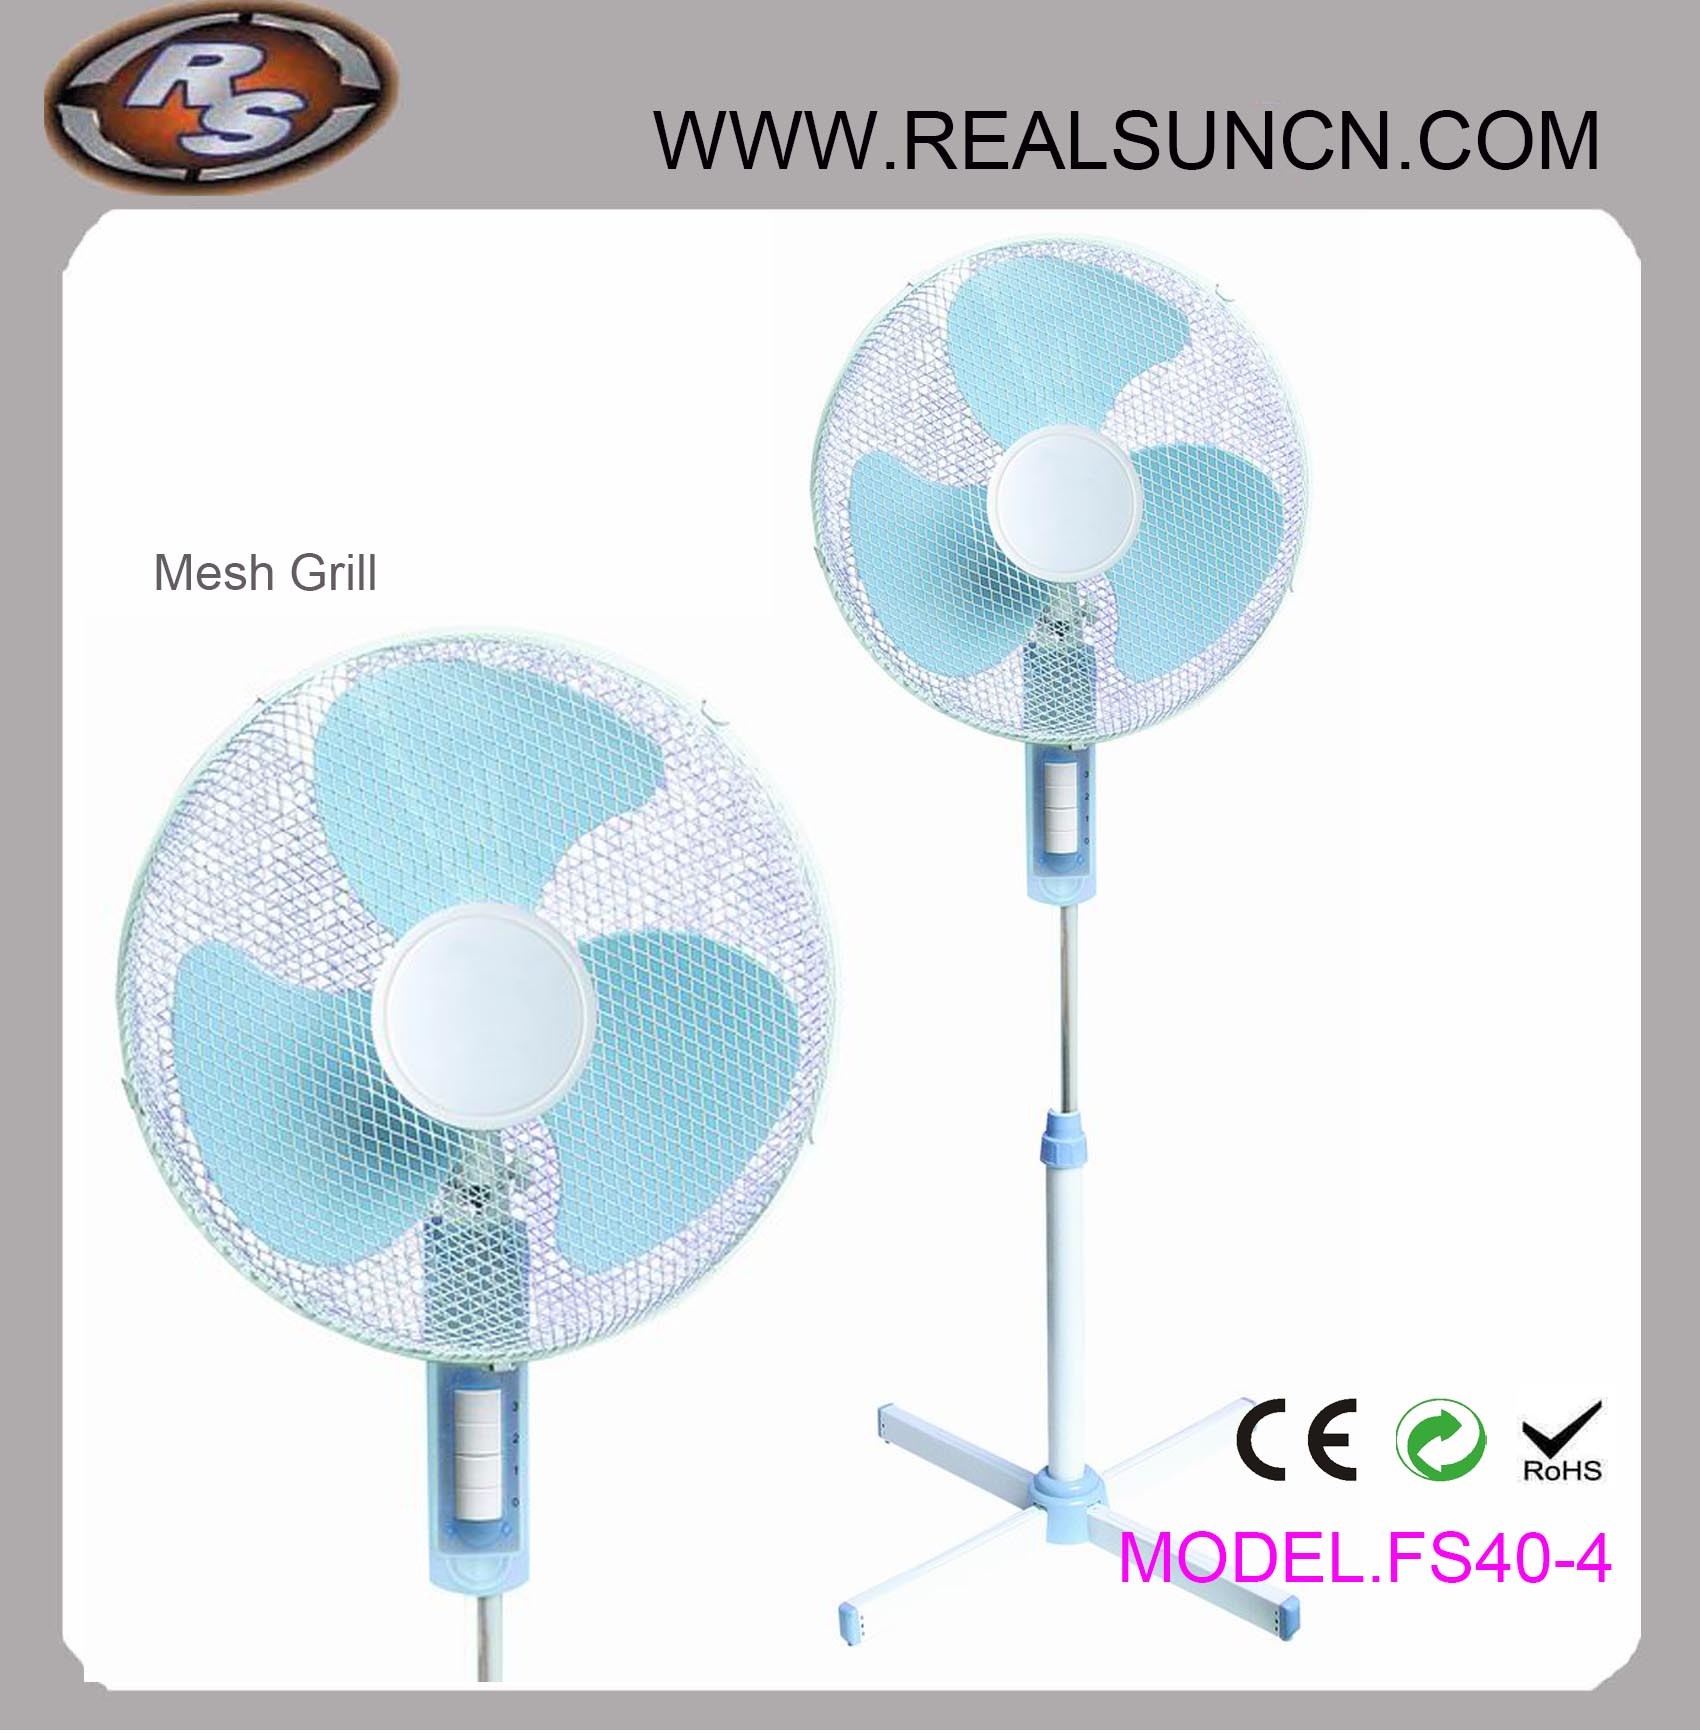 2015 Hot Selling Standing Fan-Good Quality Competitive Price